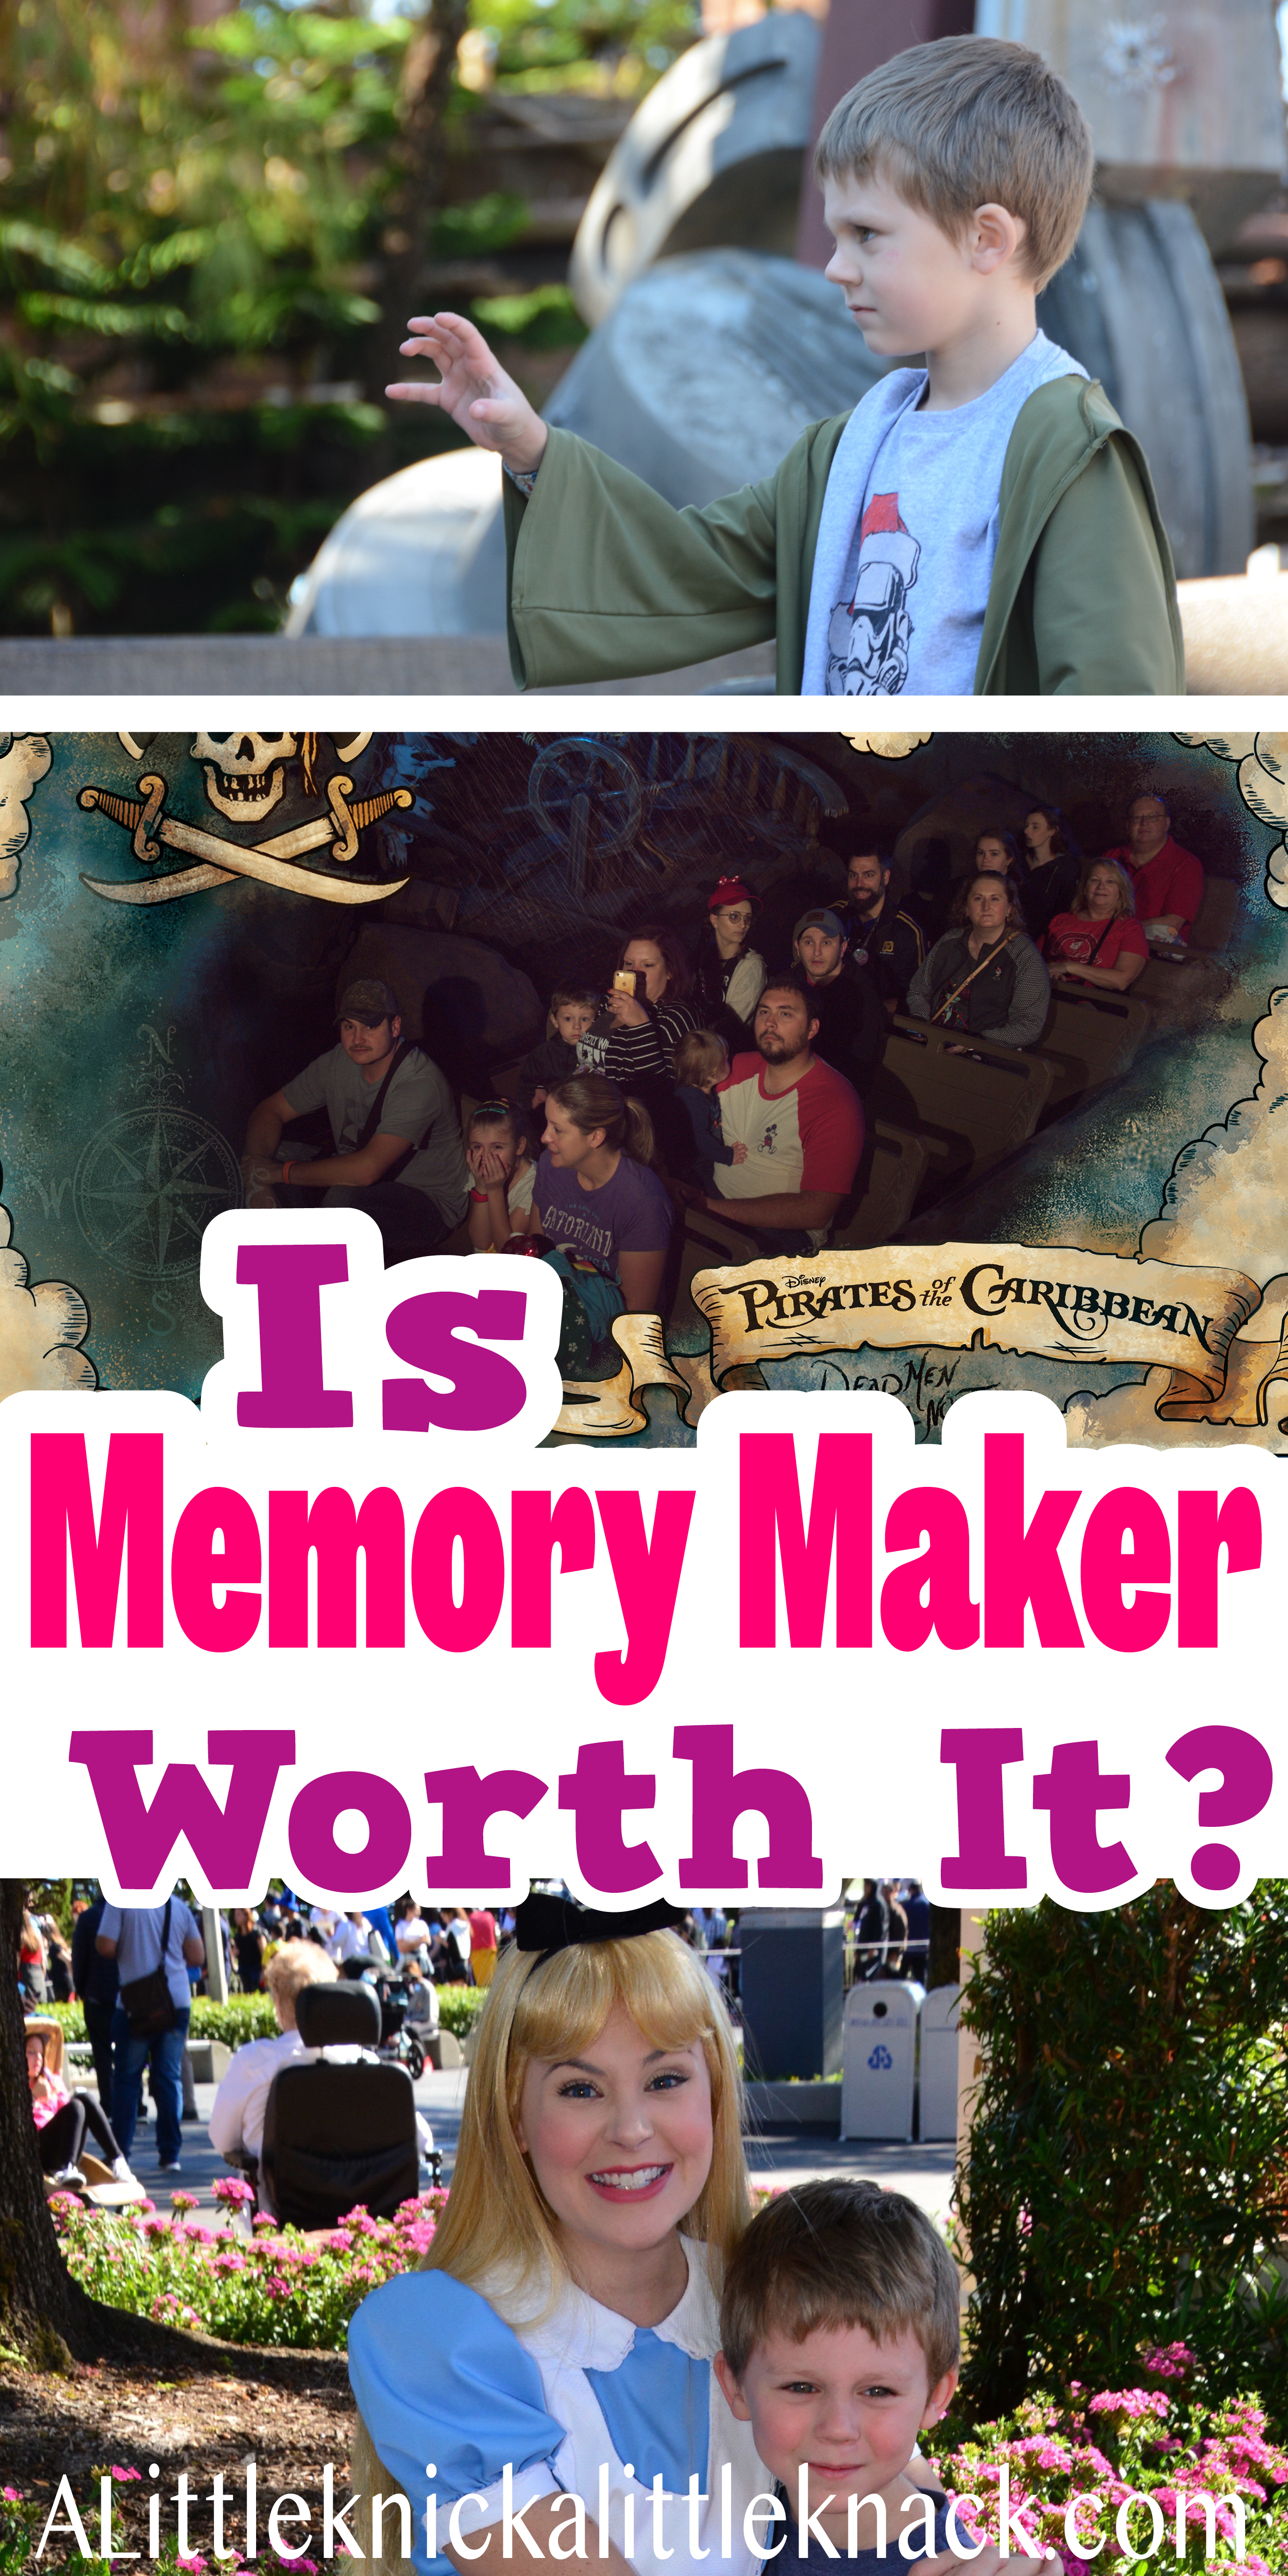 A collage of Disney World ride and experience photos with text overlay 